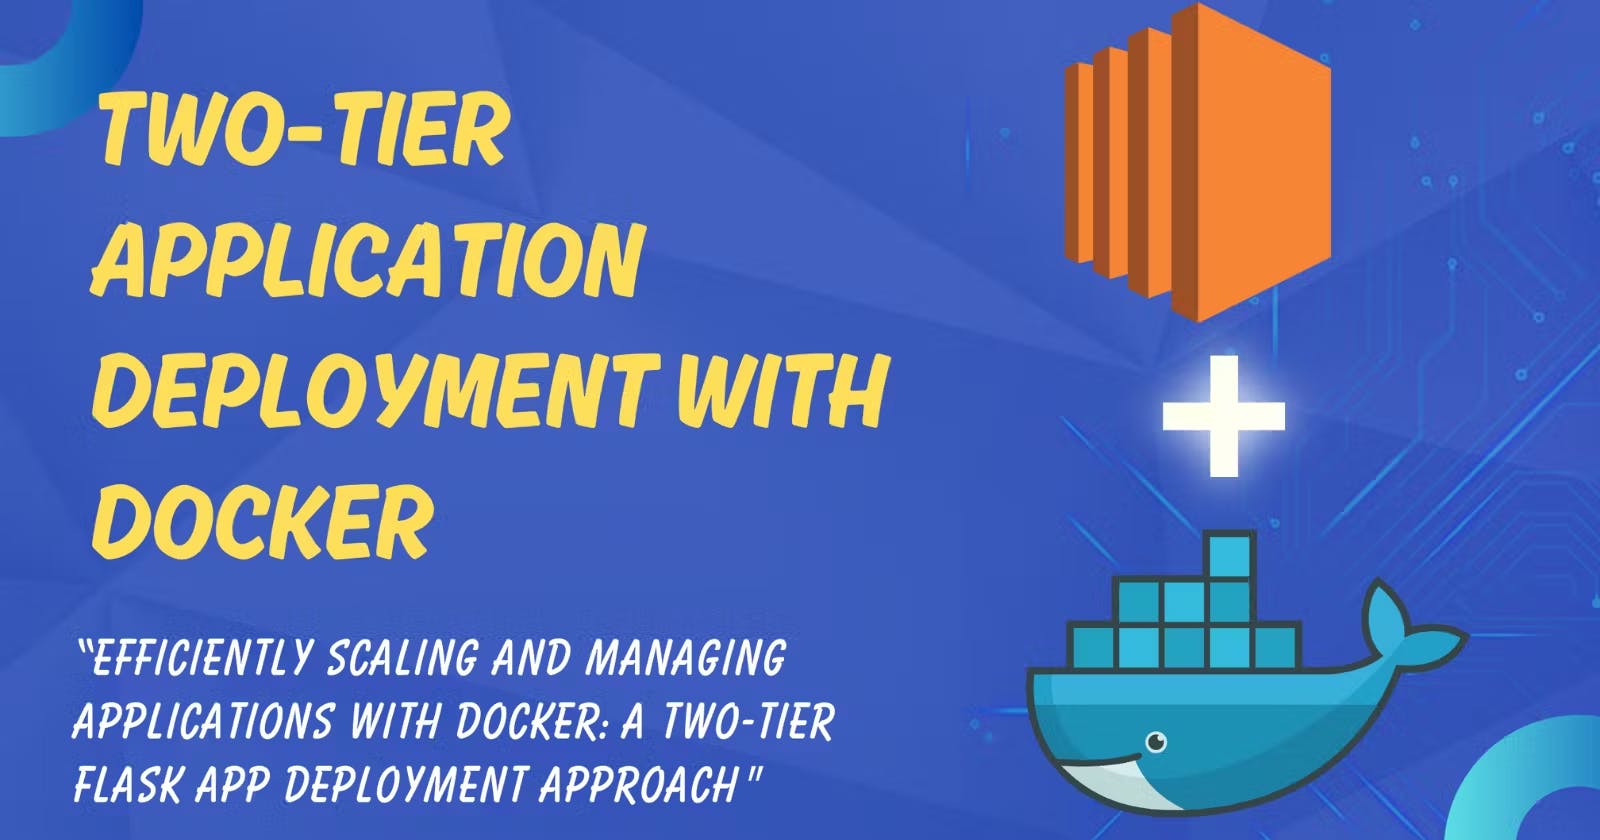 🐳Two-Tier Application 
                  Deployment with Docker